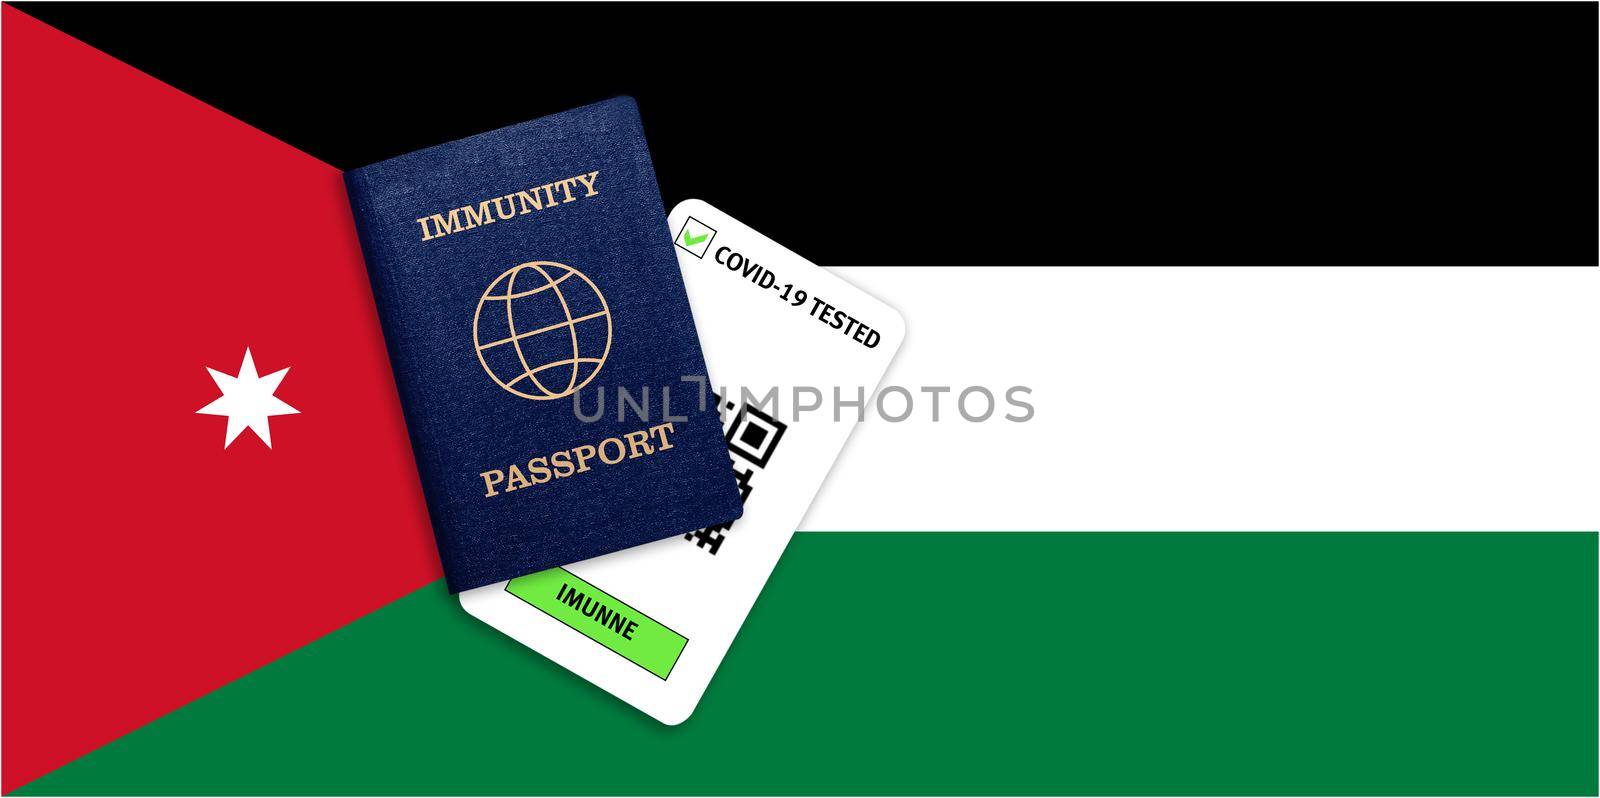 Concept of Immunity passport, certificate for traveling after pandemic for people who have had coronavirus or made vaccine and test result for COVID-19 on flag of Jordan